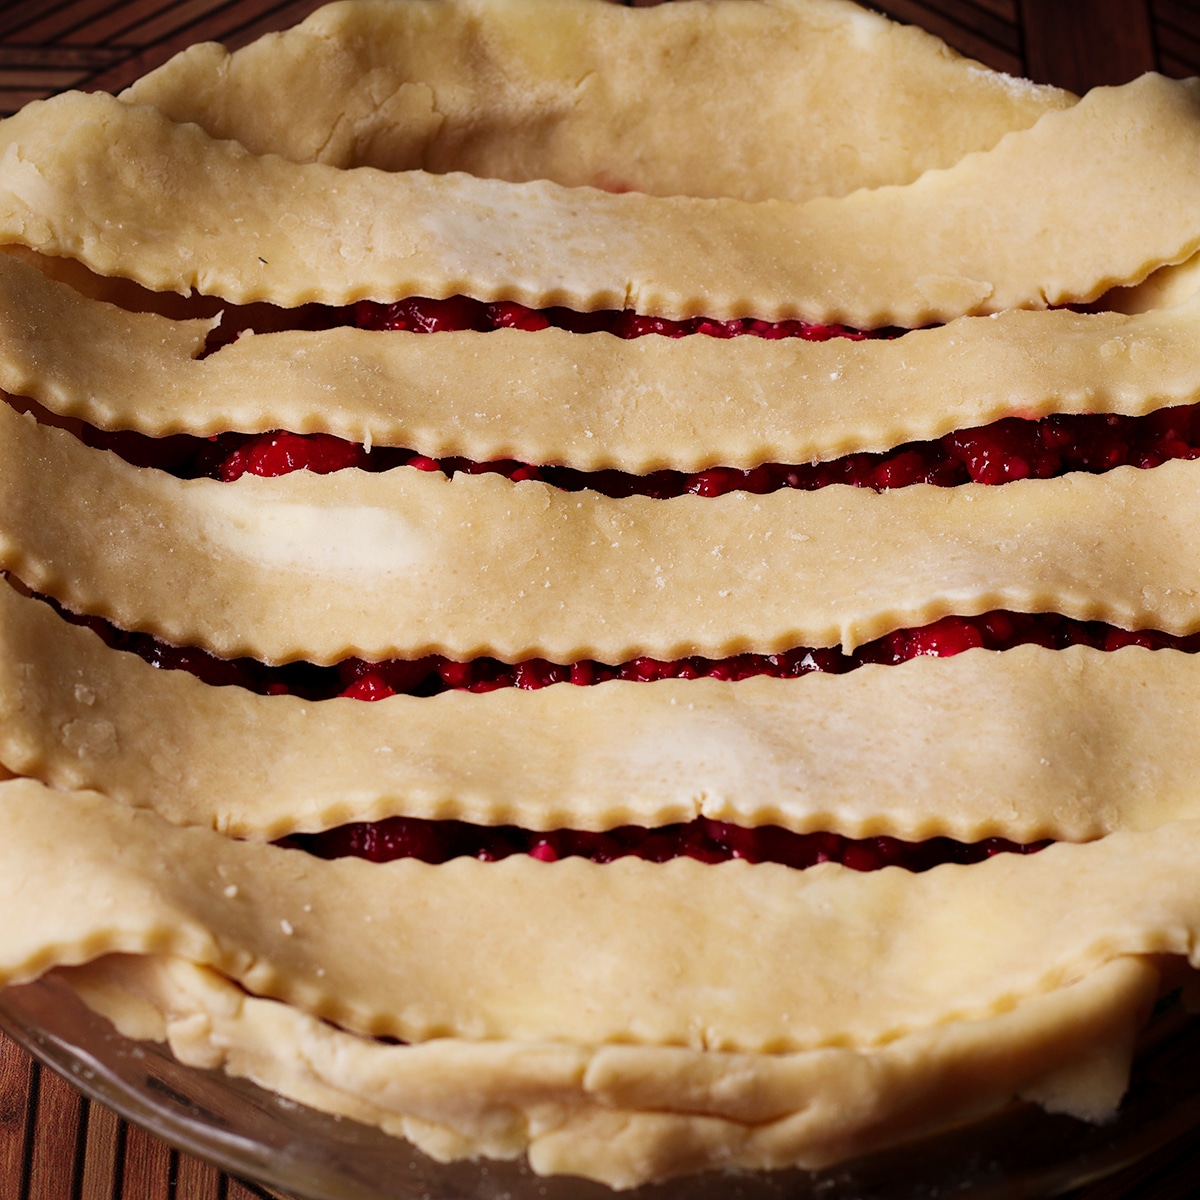 The first step in creating a lattice pie crust is to lay strips of pie dough over the pie, arranging them parallel to each other.